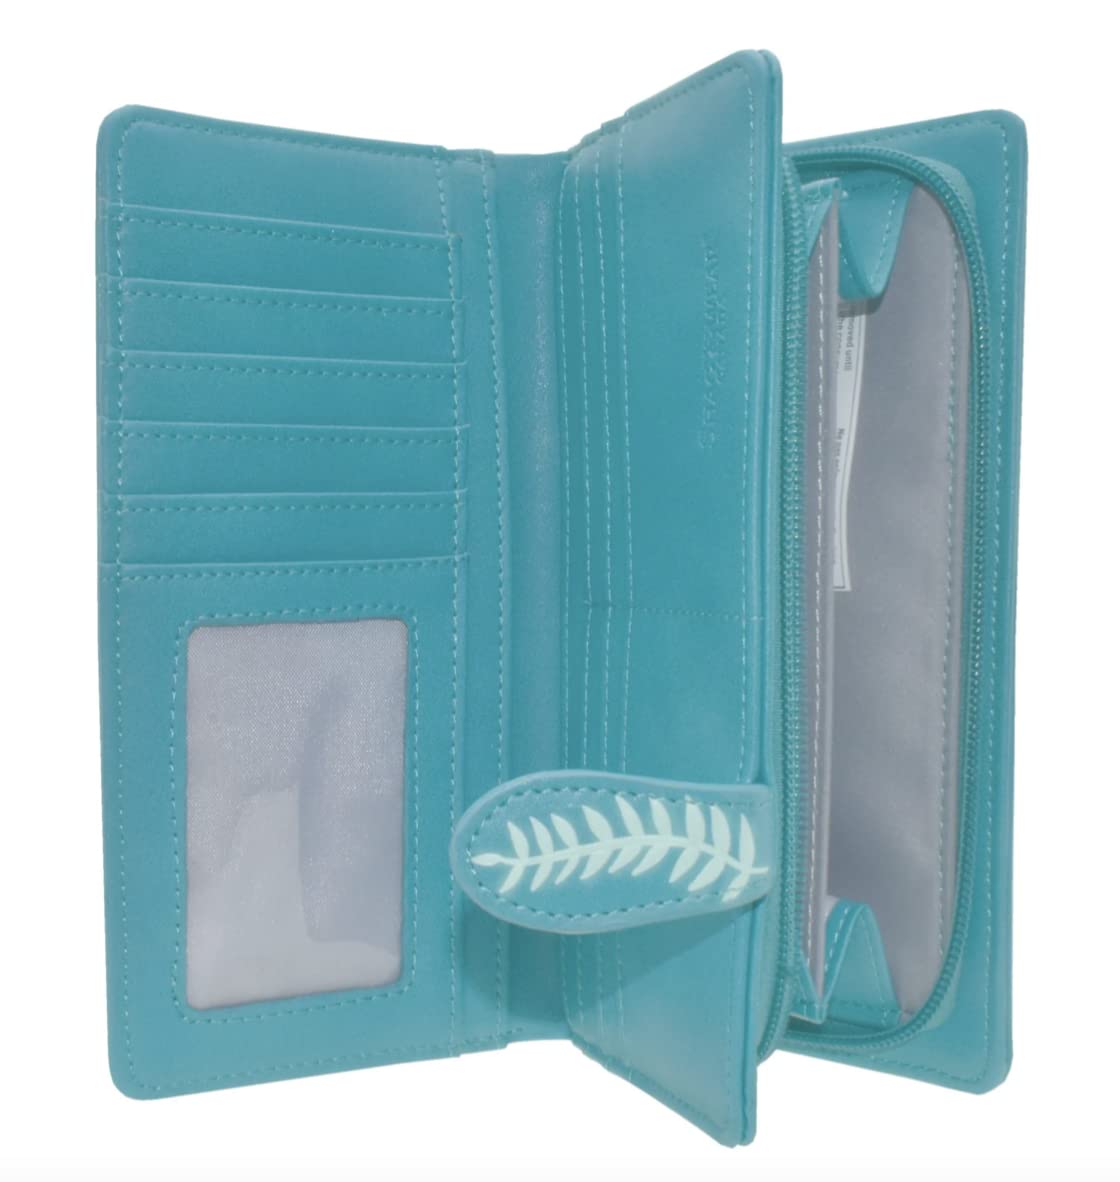 Teal Manatee Vegan Leather Wallet - Stylish & Spacious 7" Women's Accessory